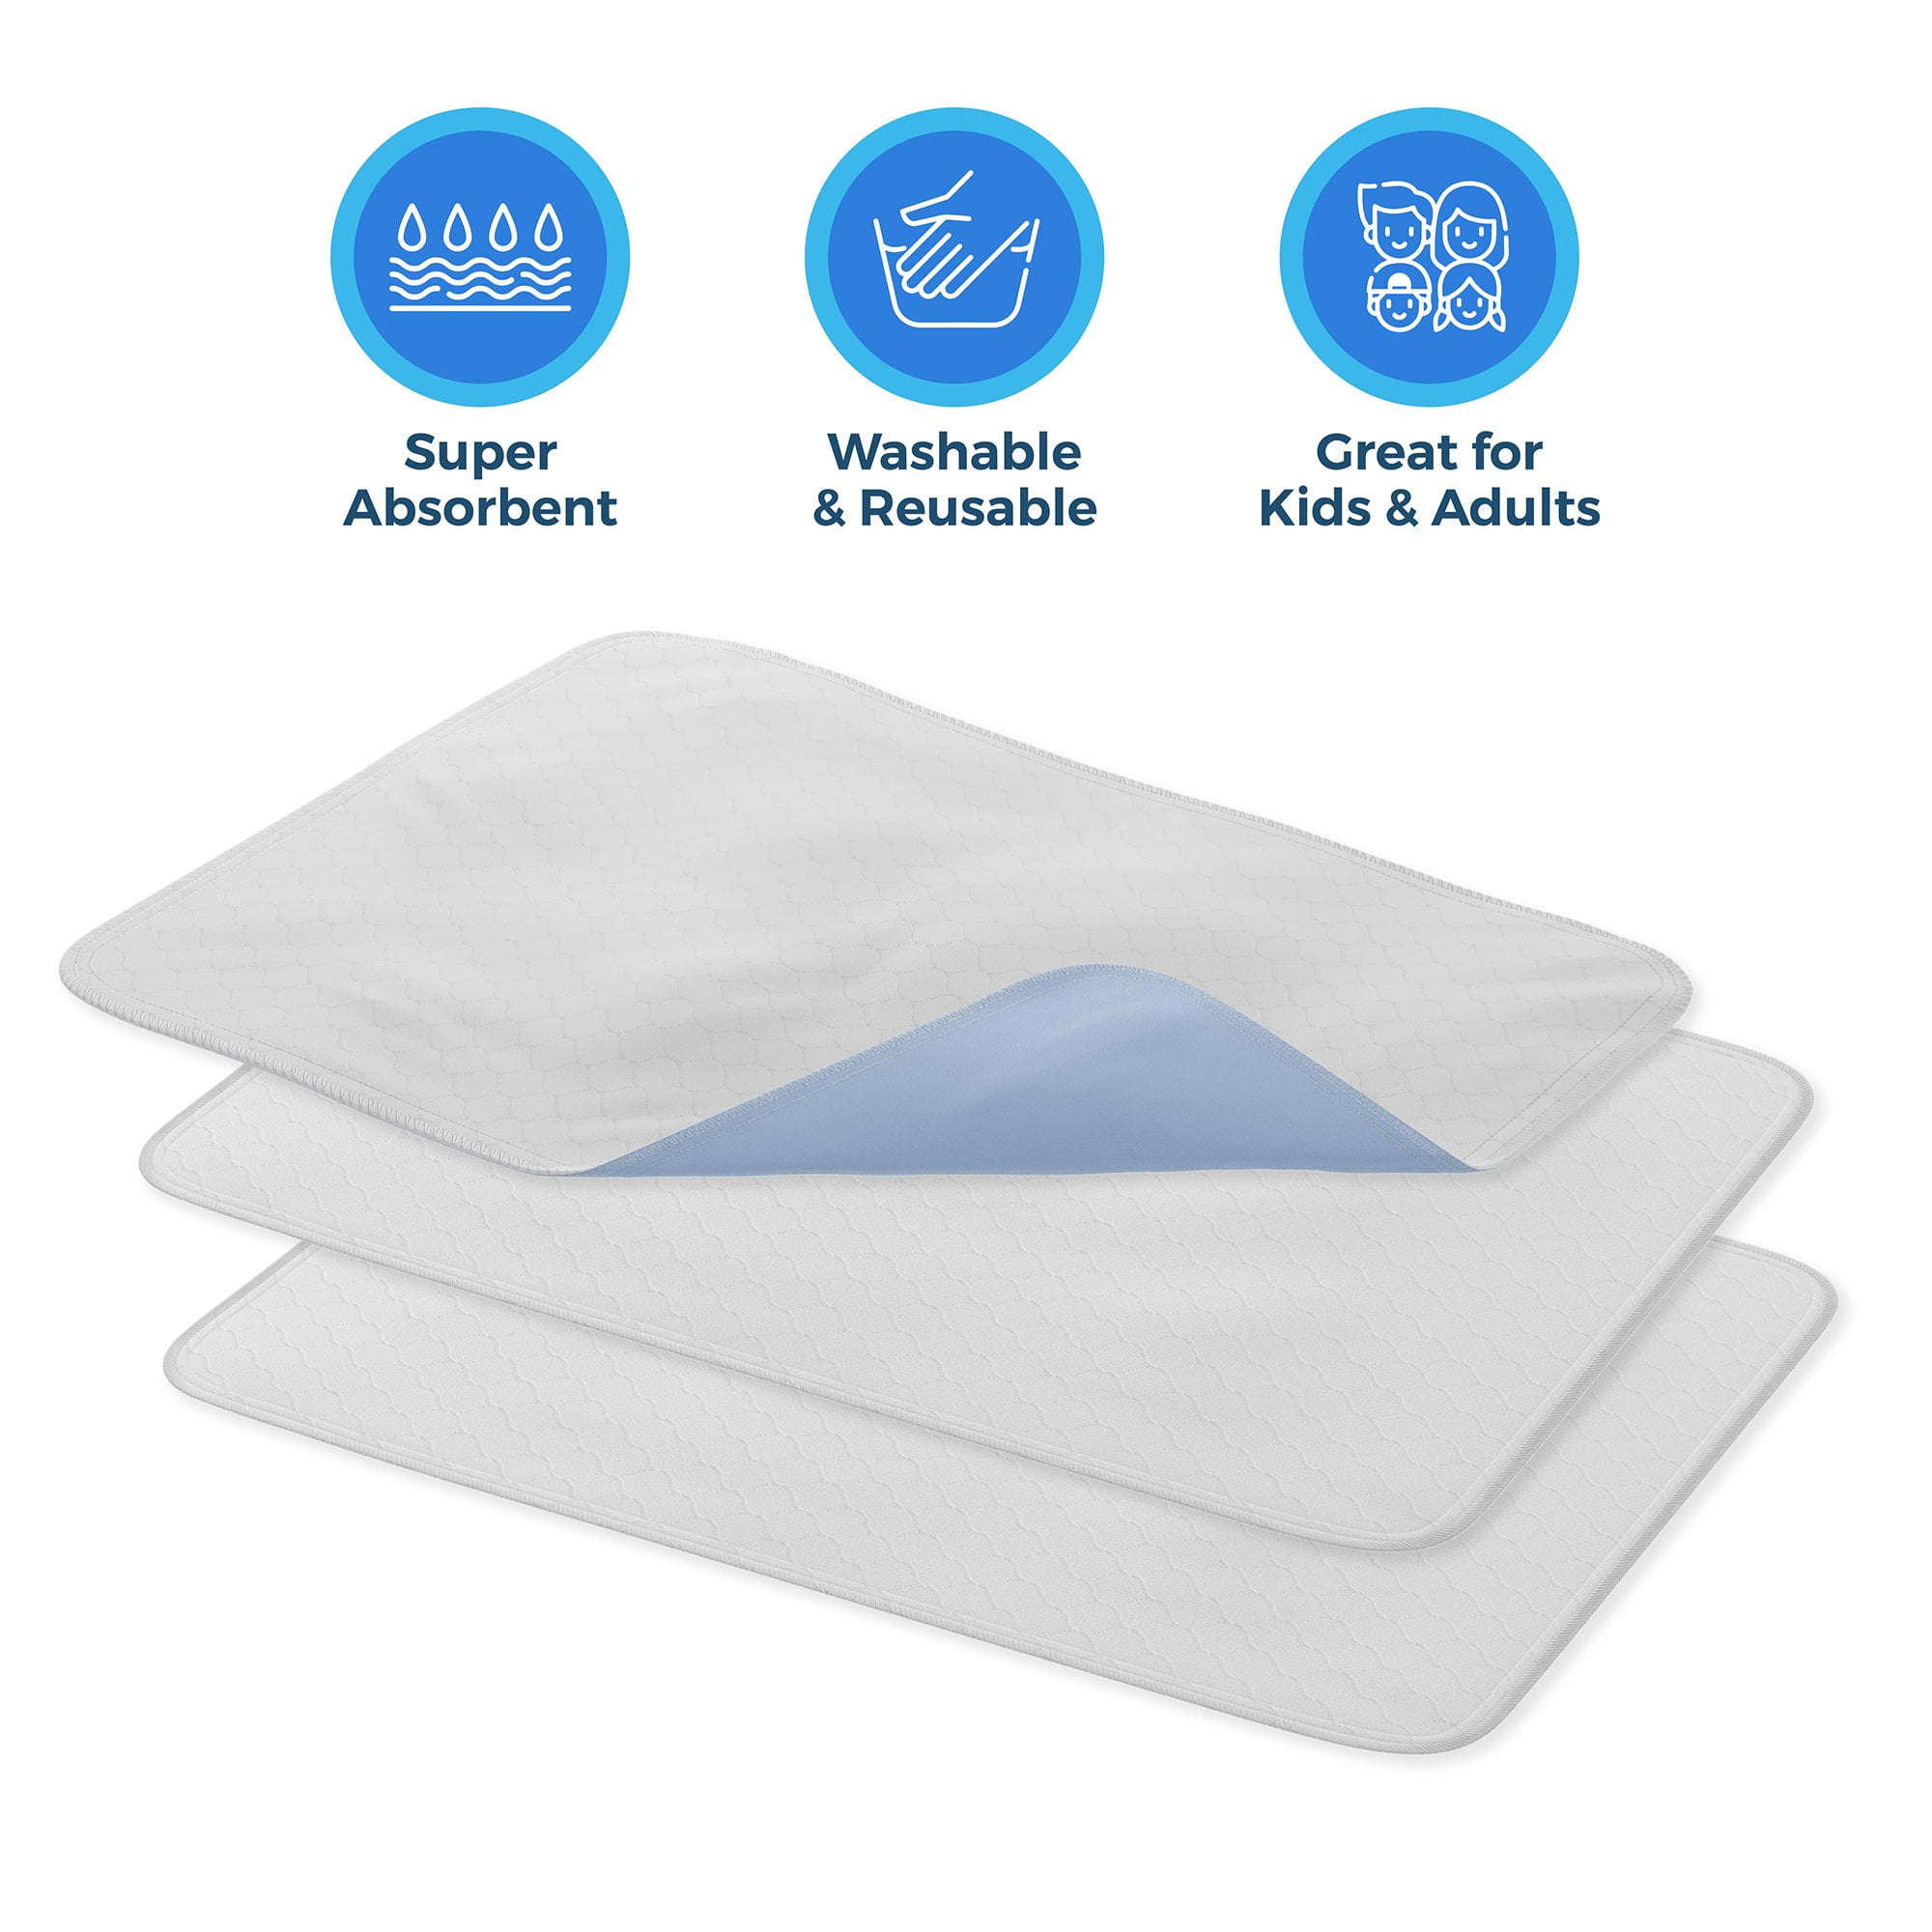 KEKOY 4 Layer Reusable Incontinence Bed Underpad, Washable Super